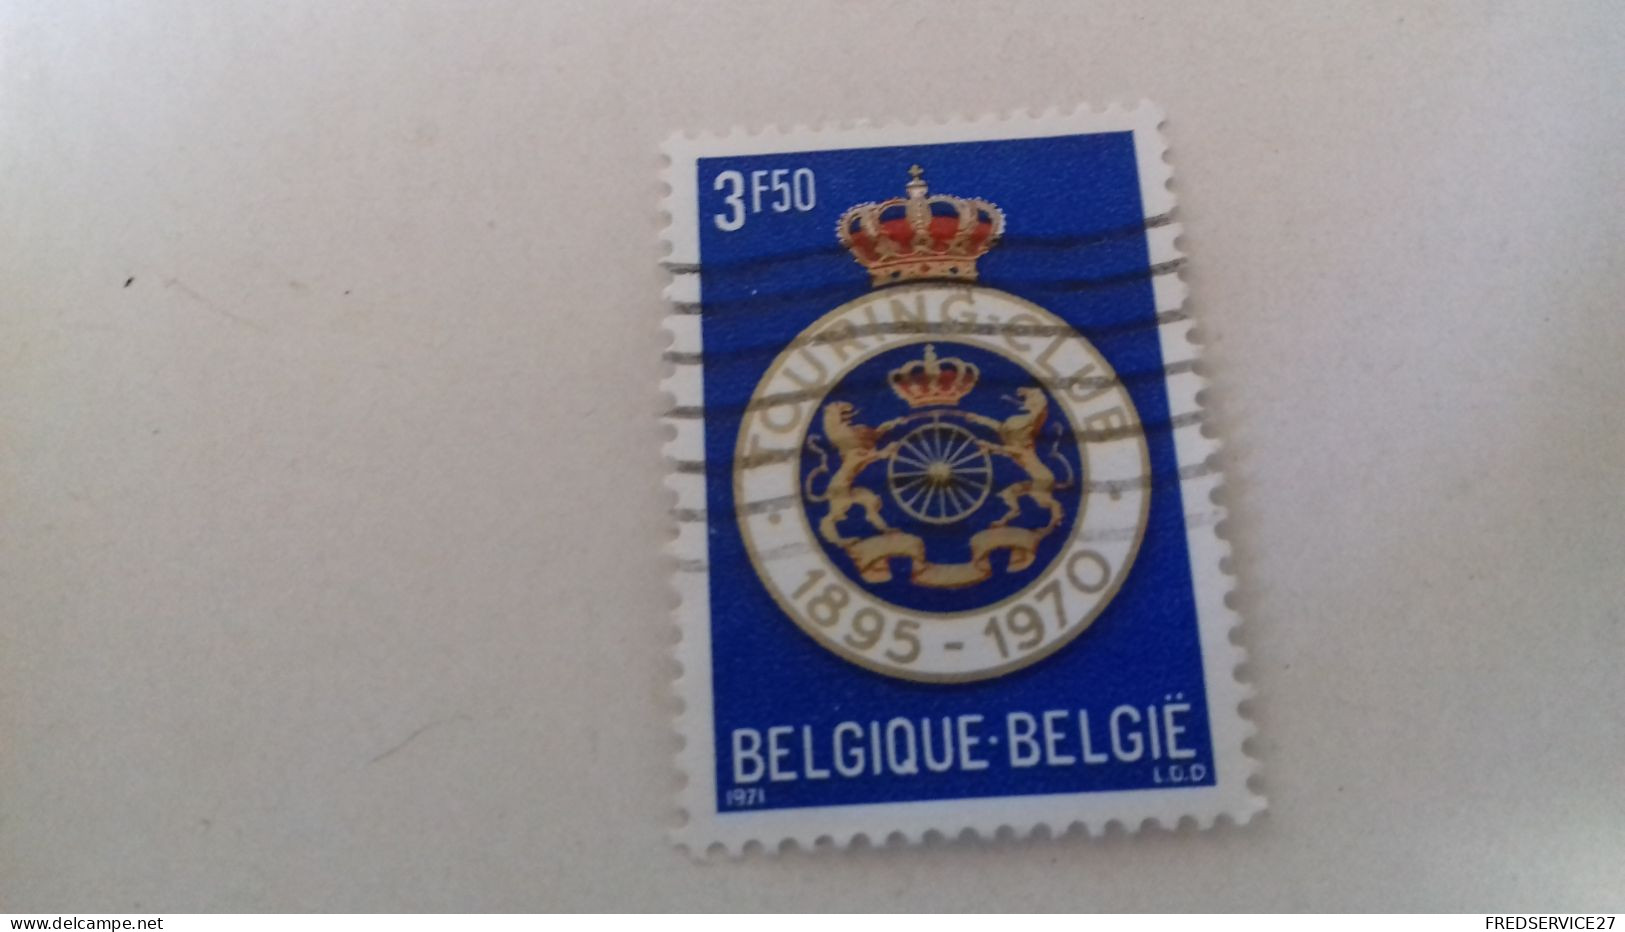 LR/ TIMBRE BELGIQUE 3F50 TOURING CLUB 1971 - Used Stamps